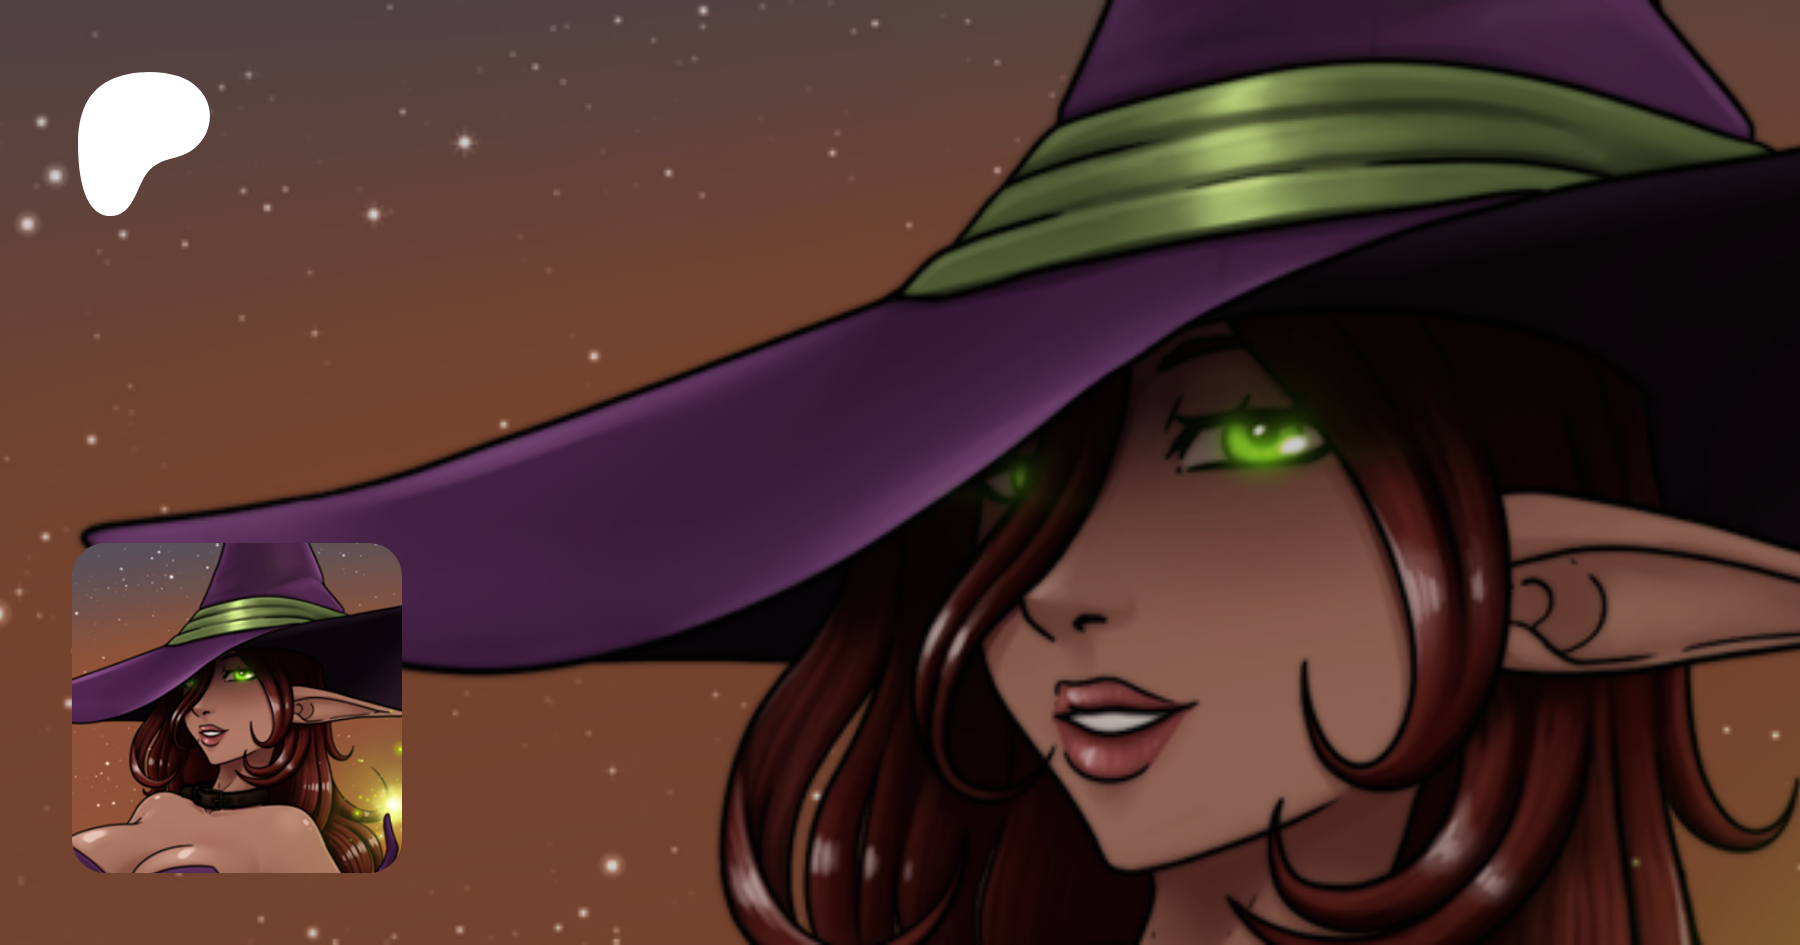 Freimgul | creating vore, giantess, damsels in distress comics and more |  Patreon